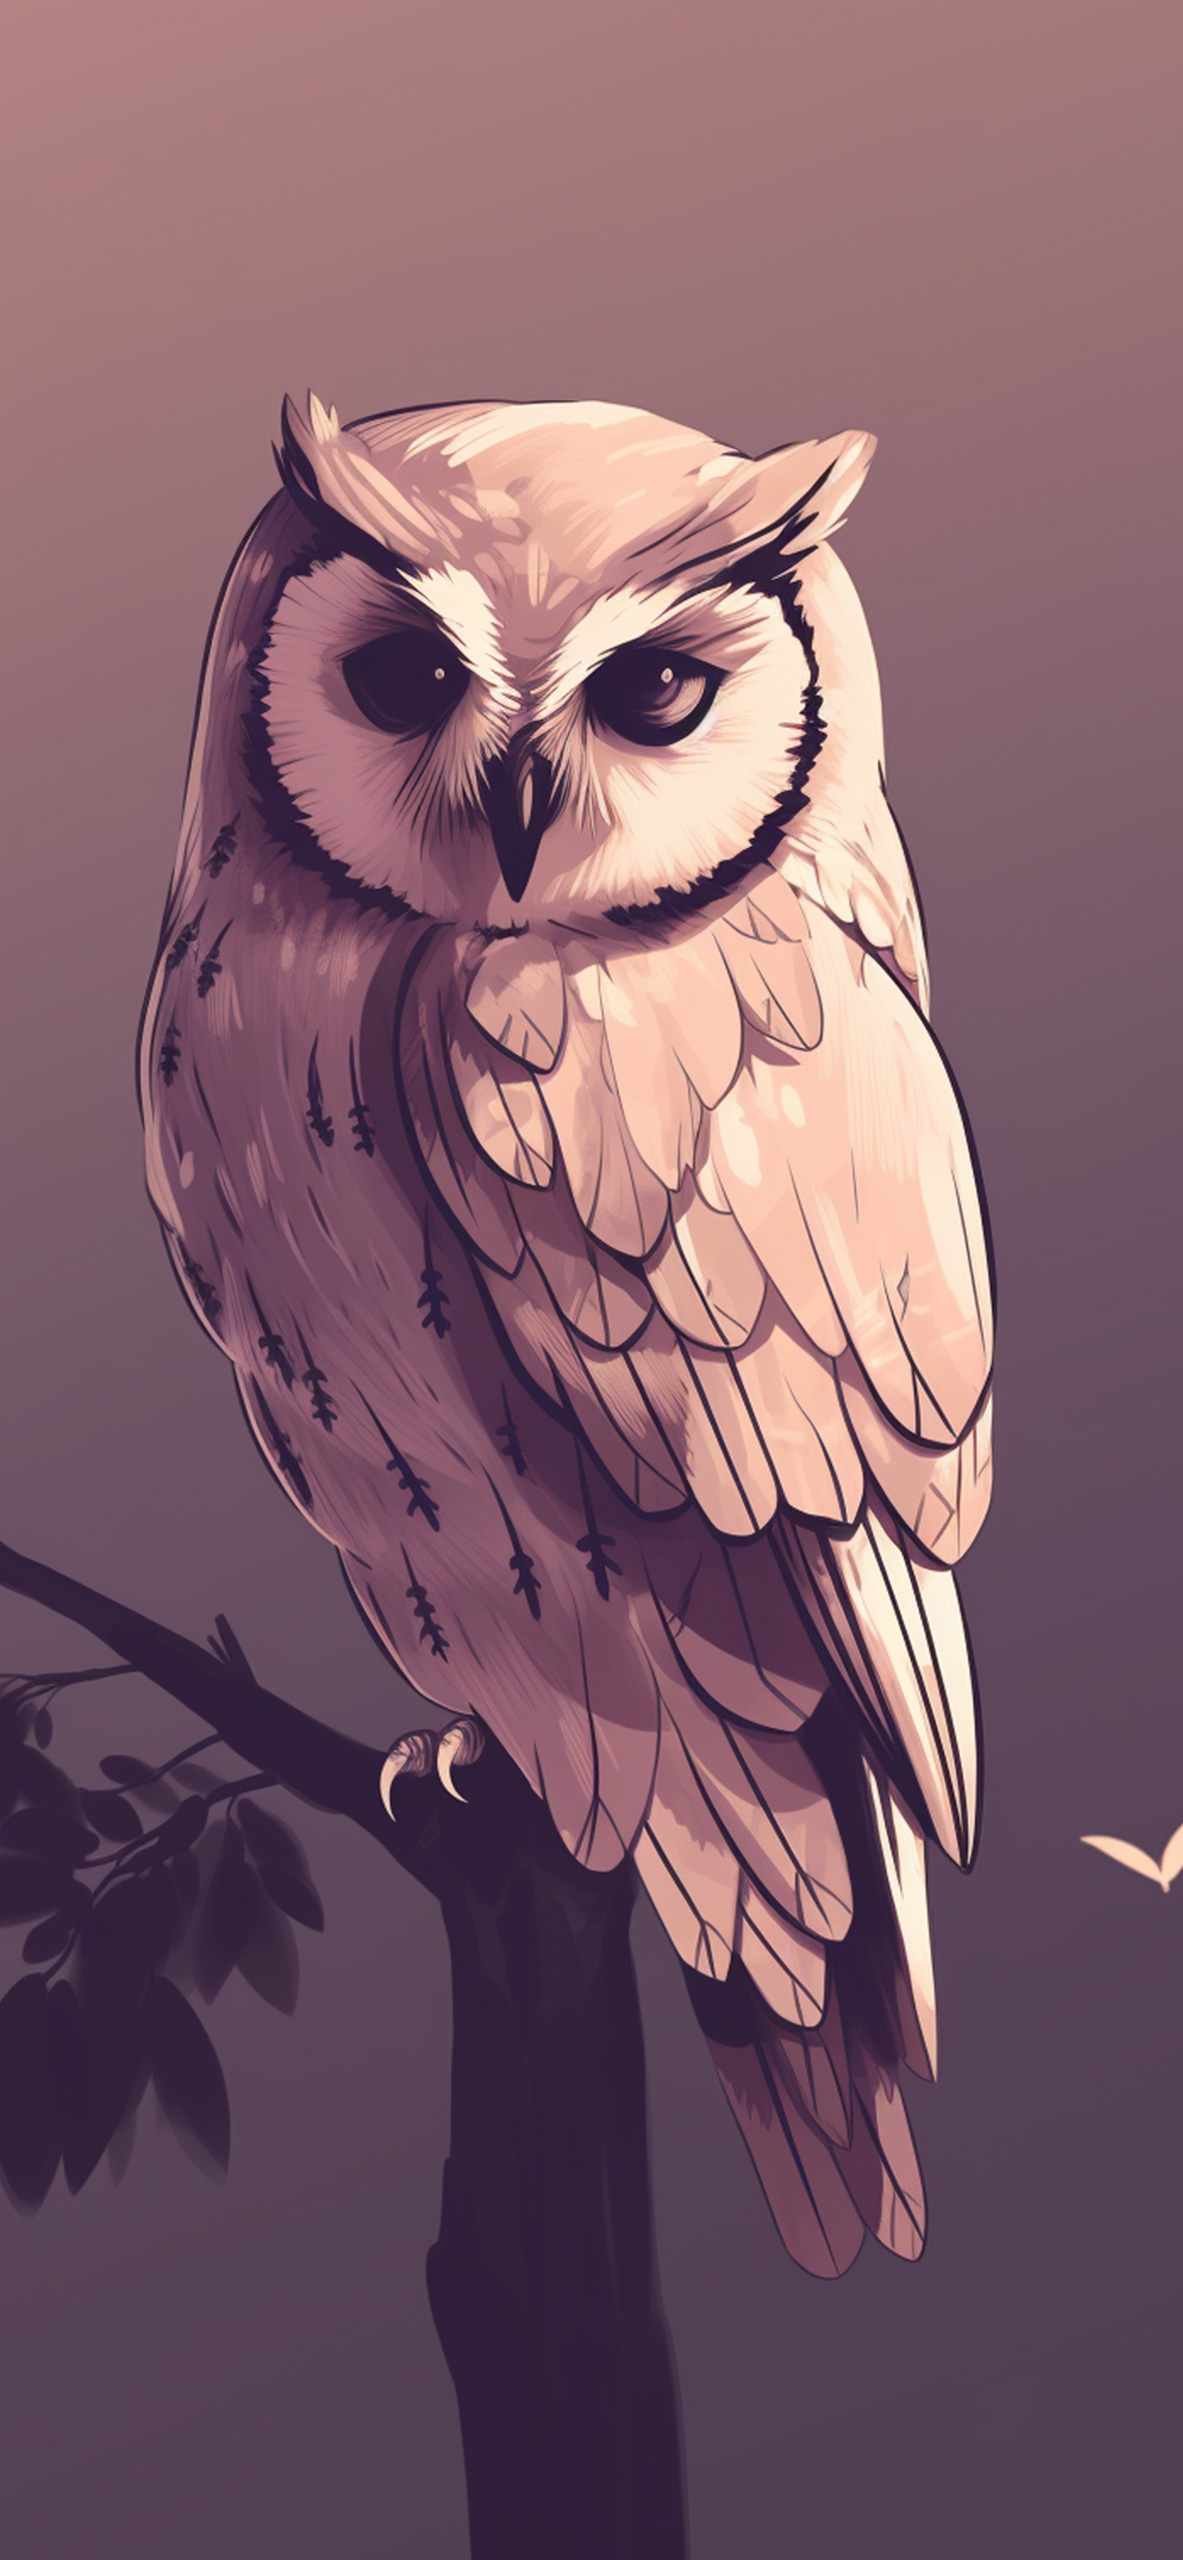 Owl Sitting on Branch Wallpaper Owl Wallpaper for iPhone